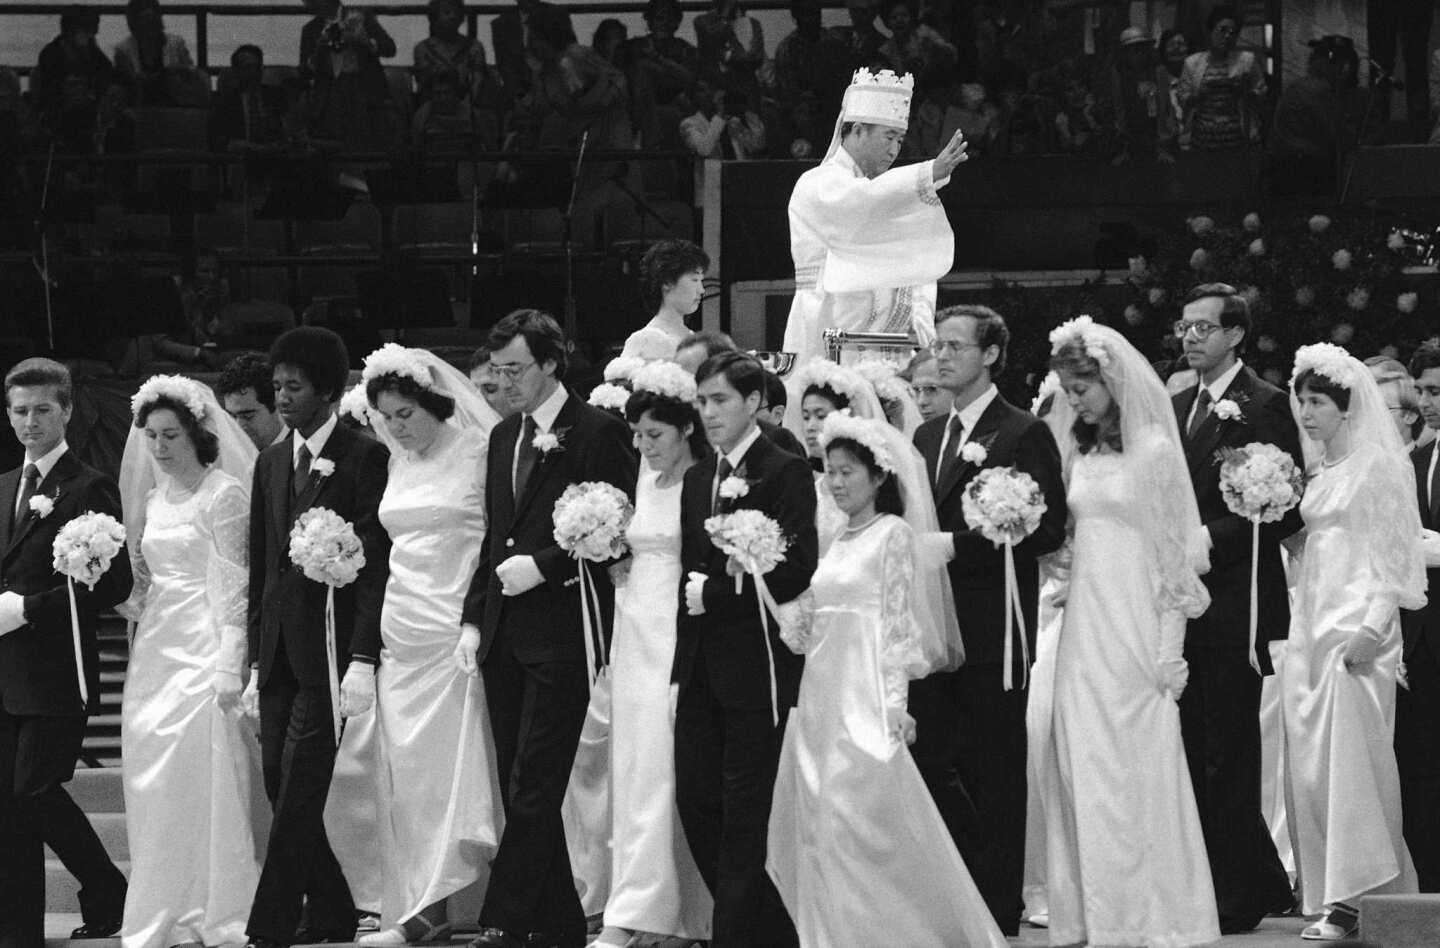 Couples march in a mass wedding procession in New York's Madison Square Garden as the Rev. Sun Myung Moon presides over the ceremony, which included more than 2,000 couples. Moon served as matchmaker for the couples. About a third included men and women of difference races or nationalities, in keeping with the church's belief that interracial marriage can help end racism.